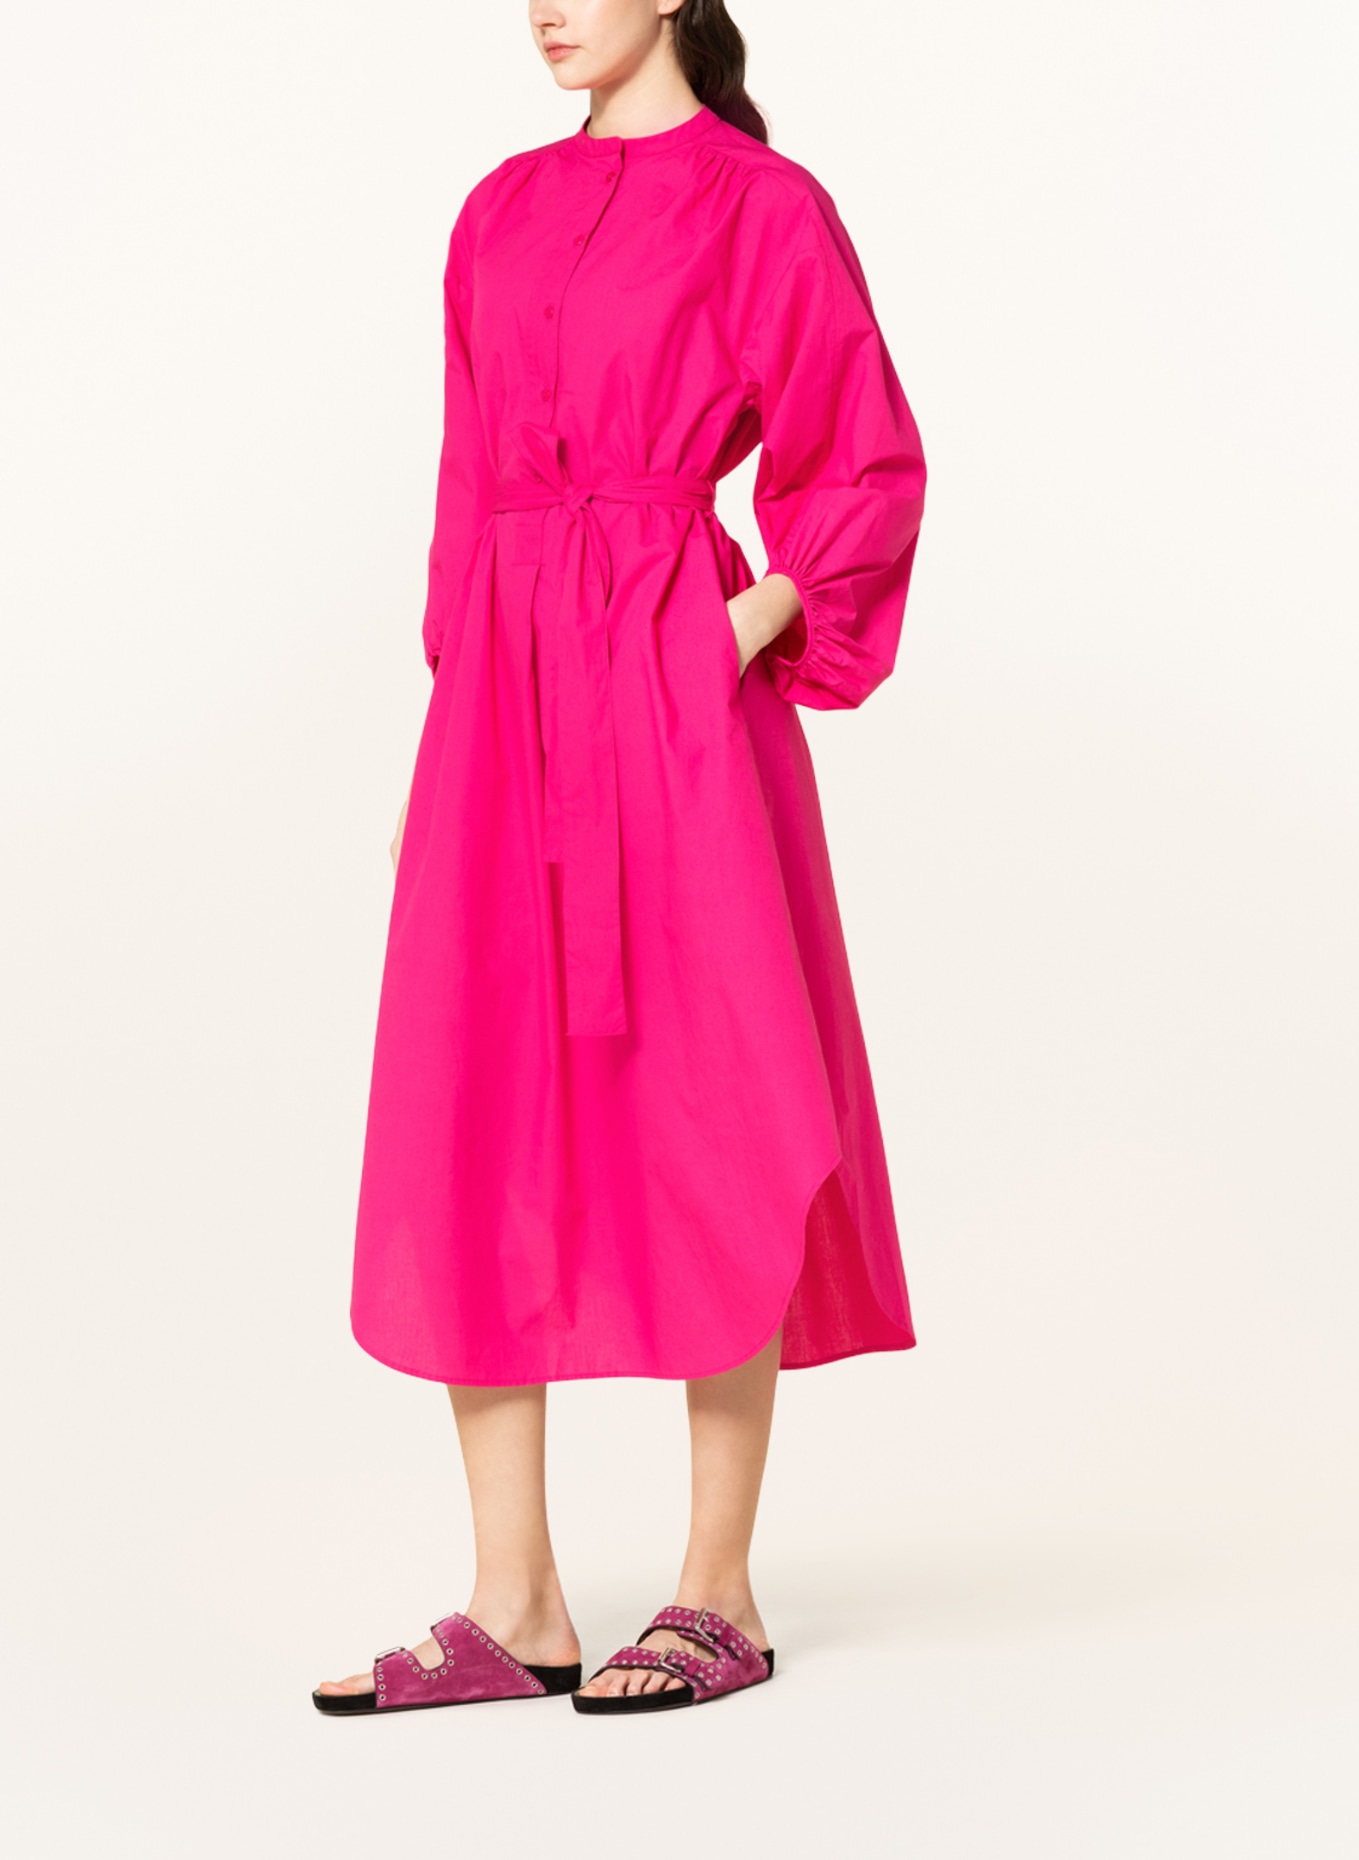 MRS & HUGS Dress with 3/4 sleeves, Color: PINK (Image 2)